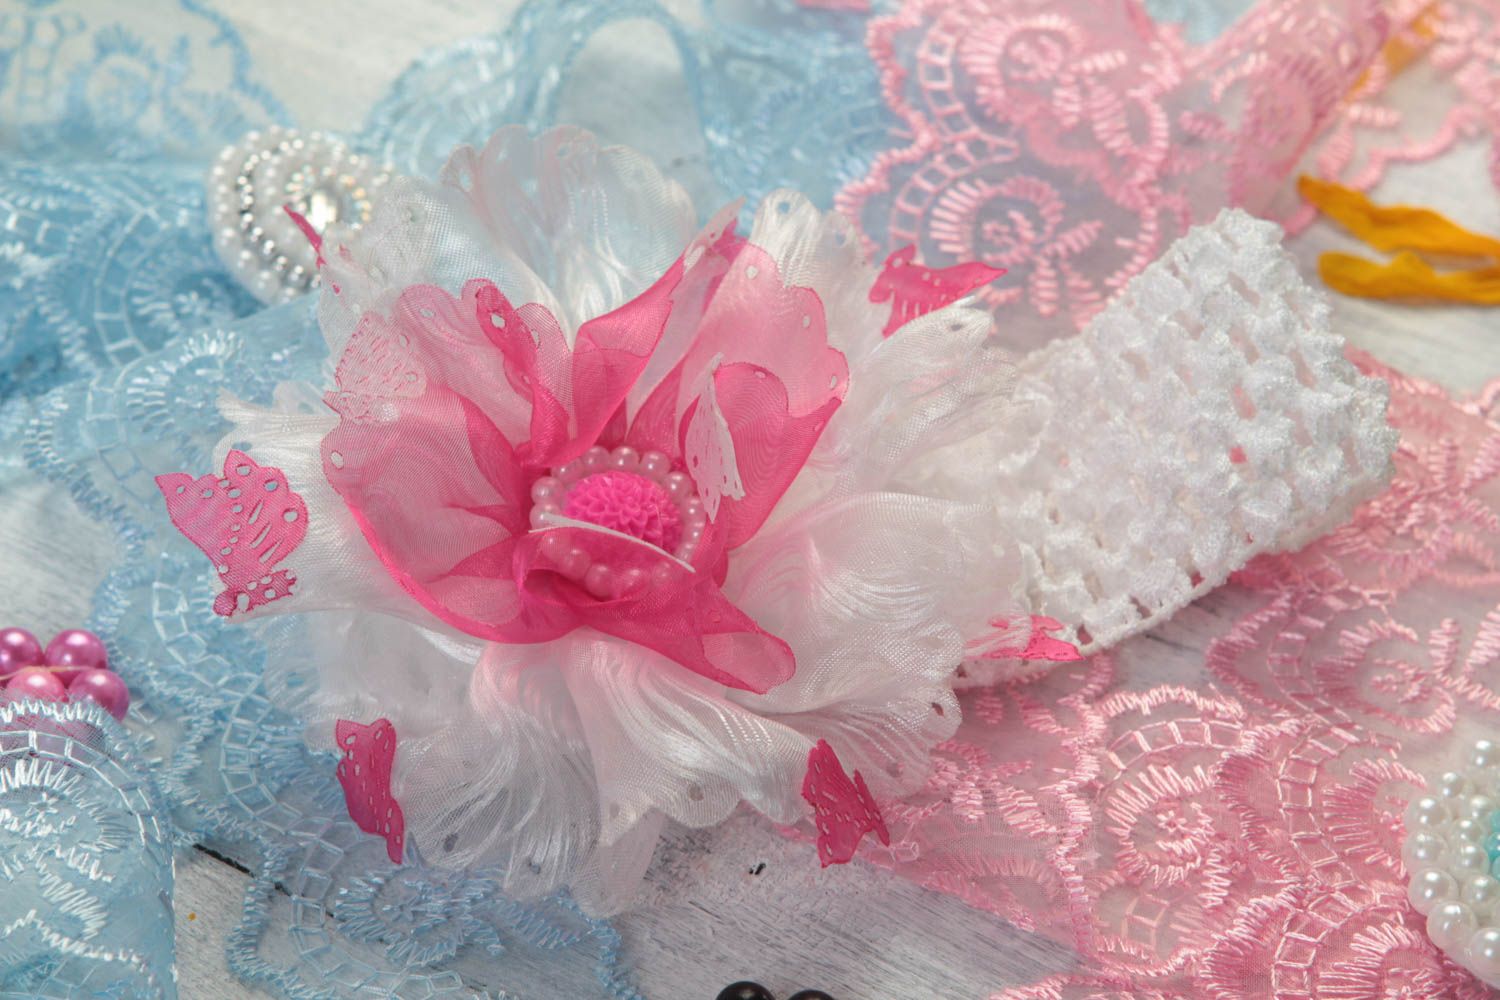 Gentle handmade textile flower headband flowers in hair gifts for her photo 1